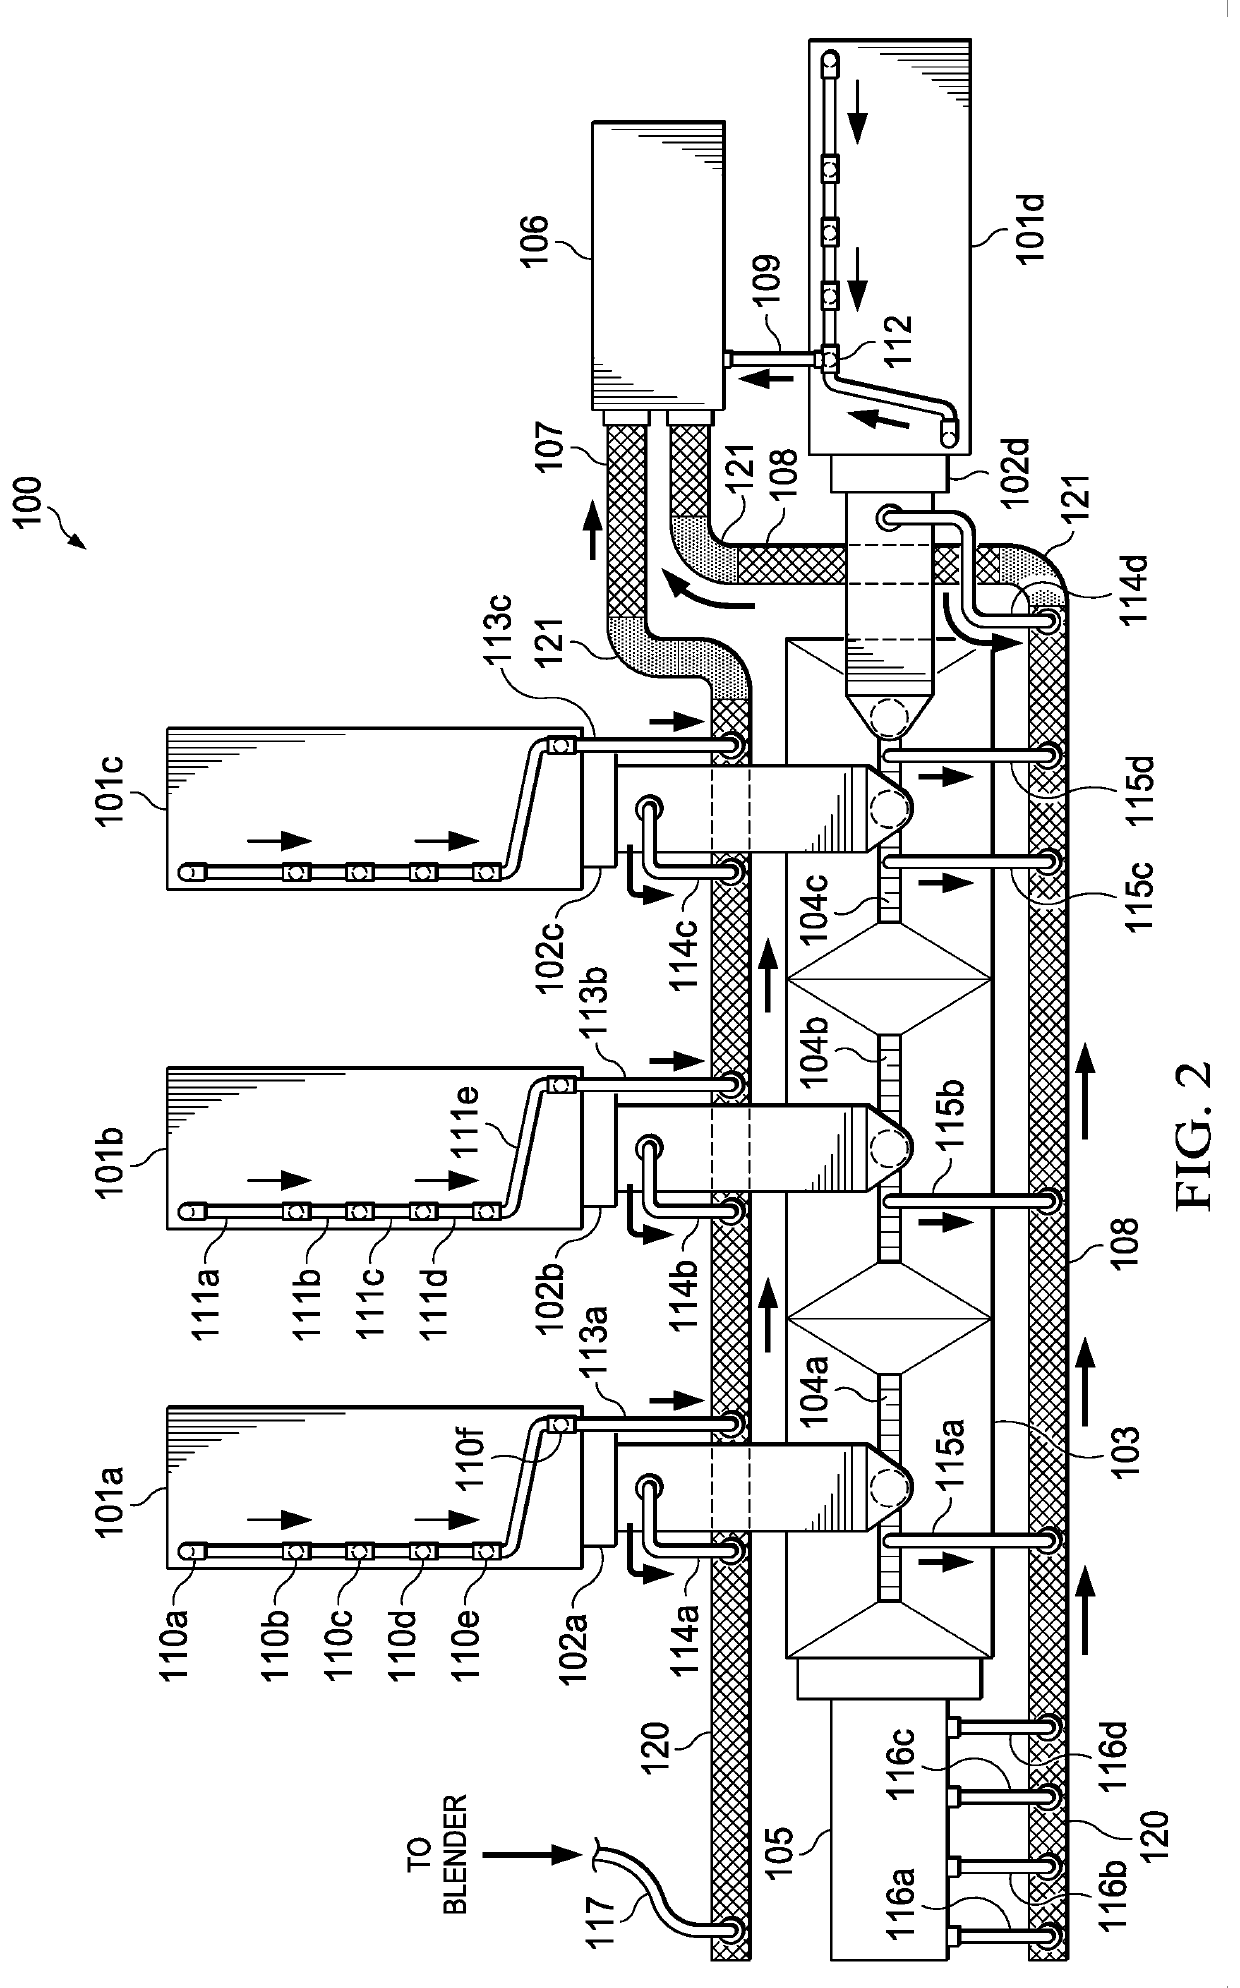 Systems and methods for controlling silica dust during hydraulic fracturing operations using an improved manifold